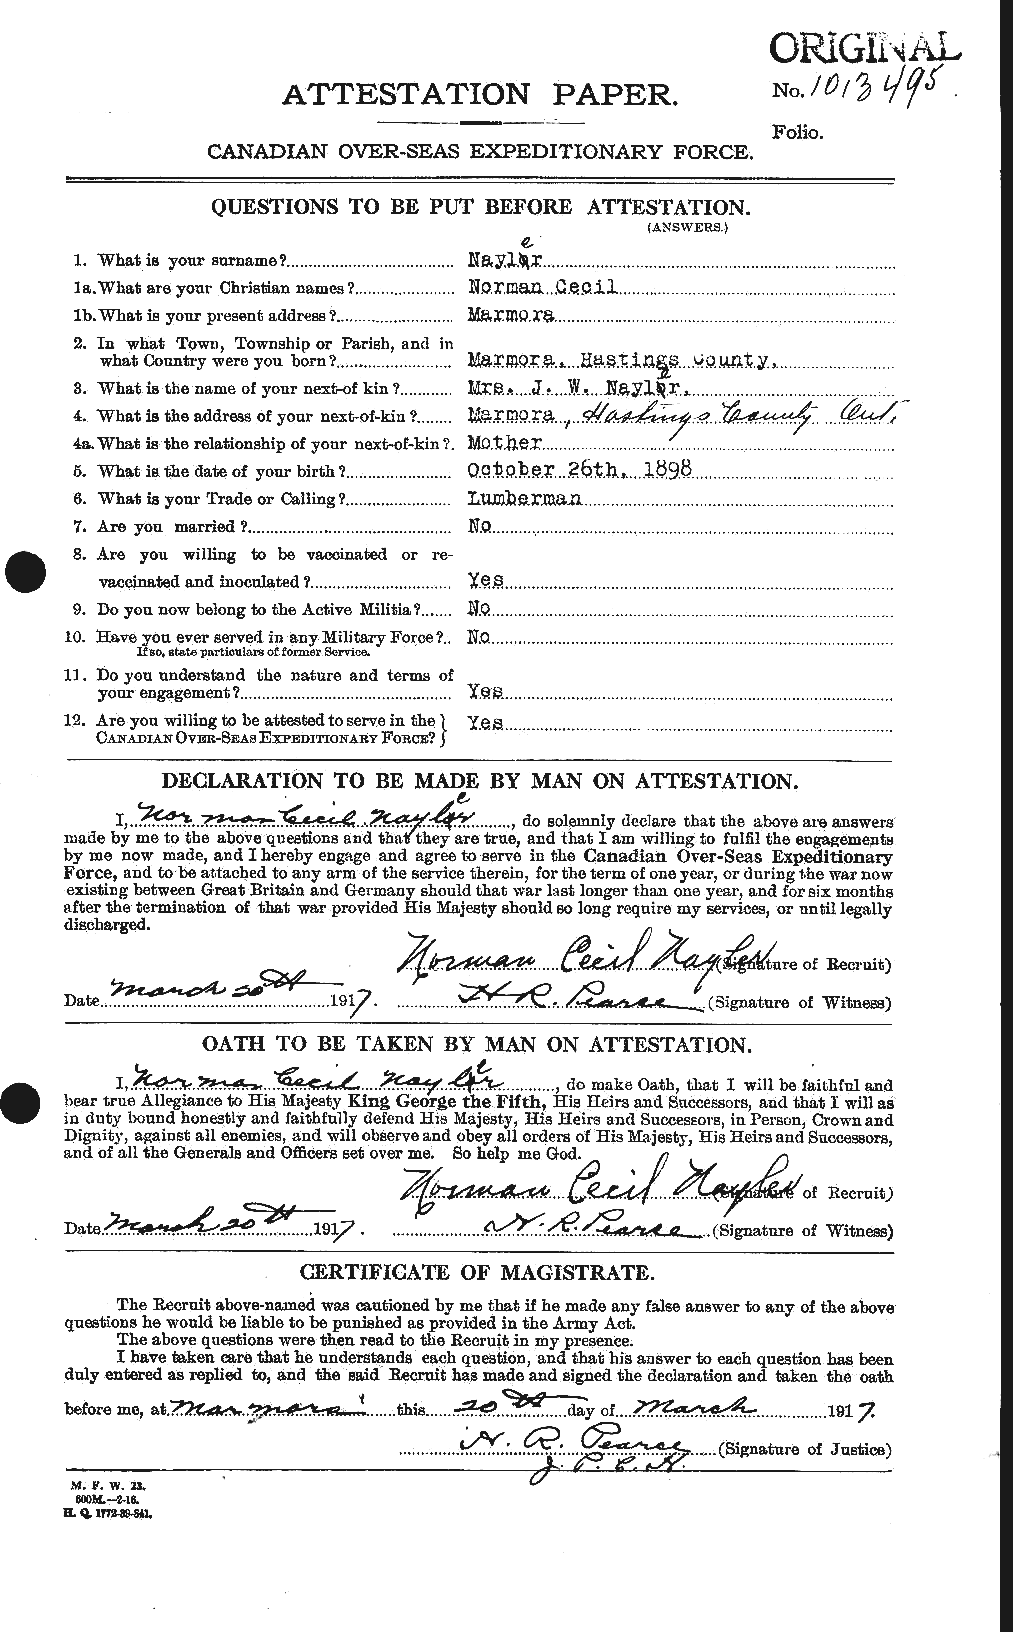 Personnel Records of the First World War - CEF 551275a